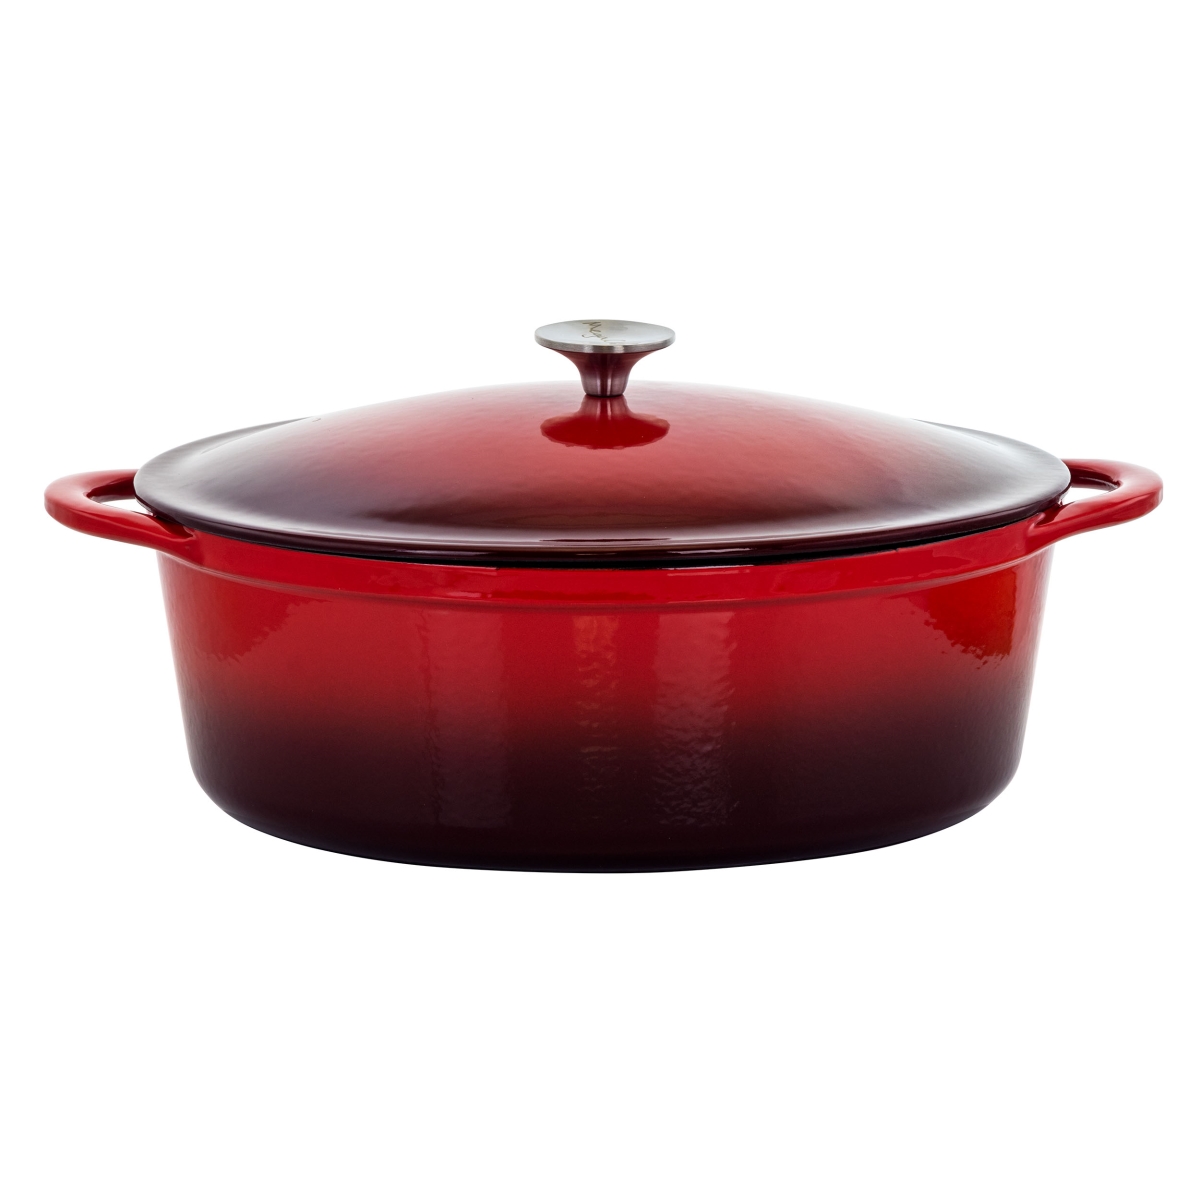 Picture of Megachef MG-CO33AR 7 qt. Oval Enameled Cast Iron Casserole, Red